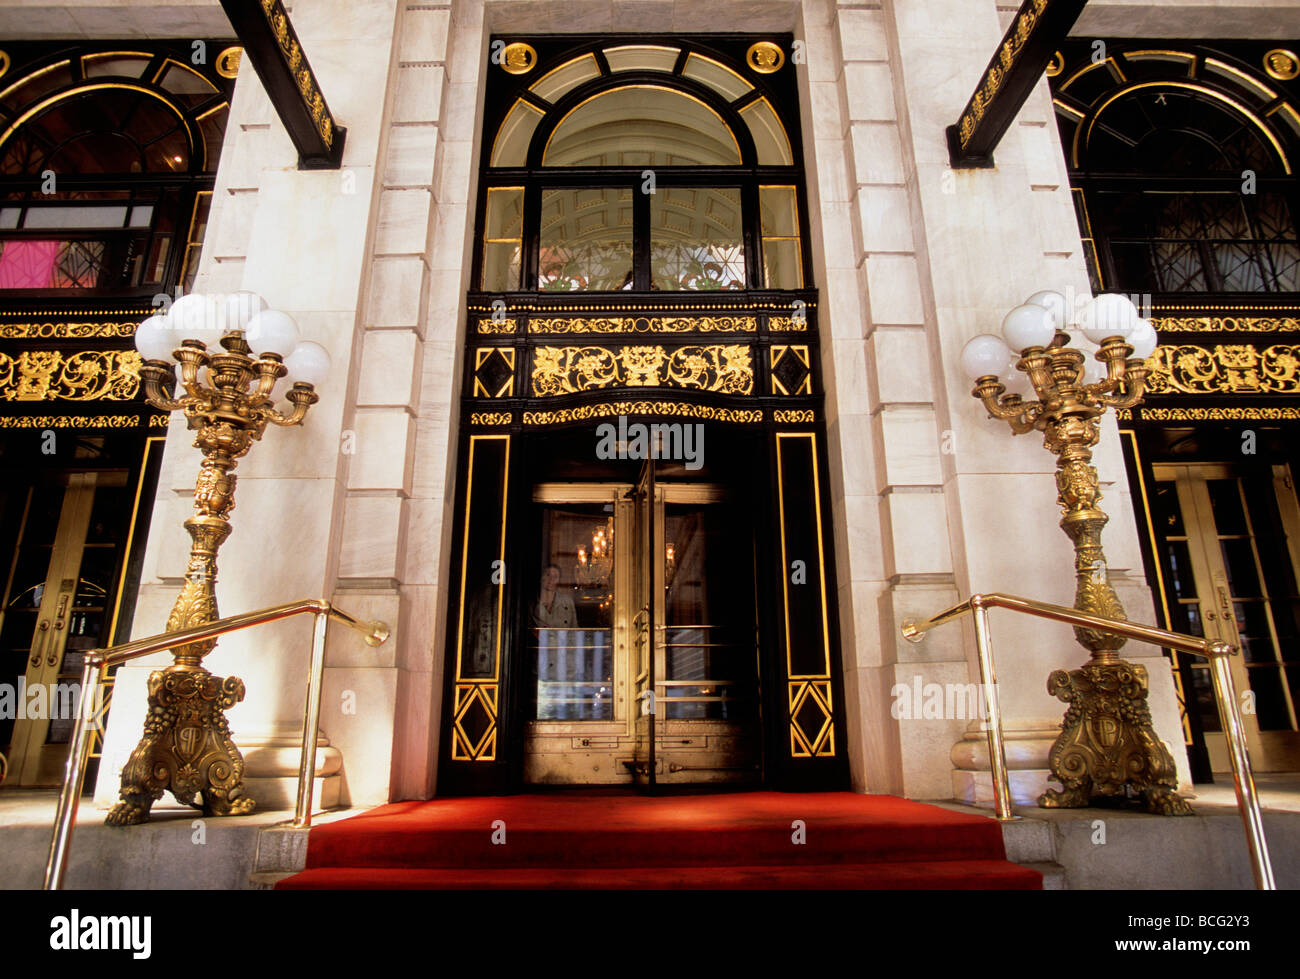 New York Plaza Hotel entrance with red carpet and ornate street lamps. Luxurious exterior on 5th Avenue in Midtown Manhattan, New York City. The Plaza Stock Photo